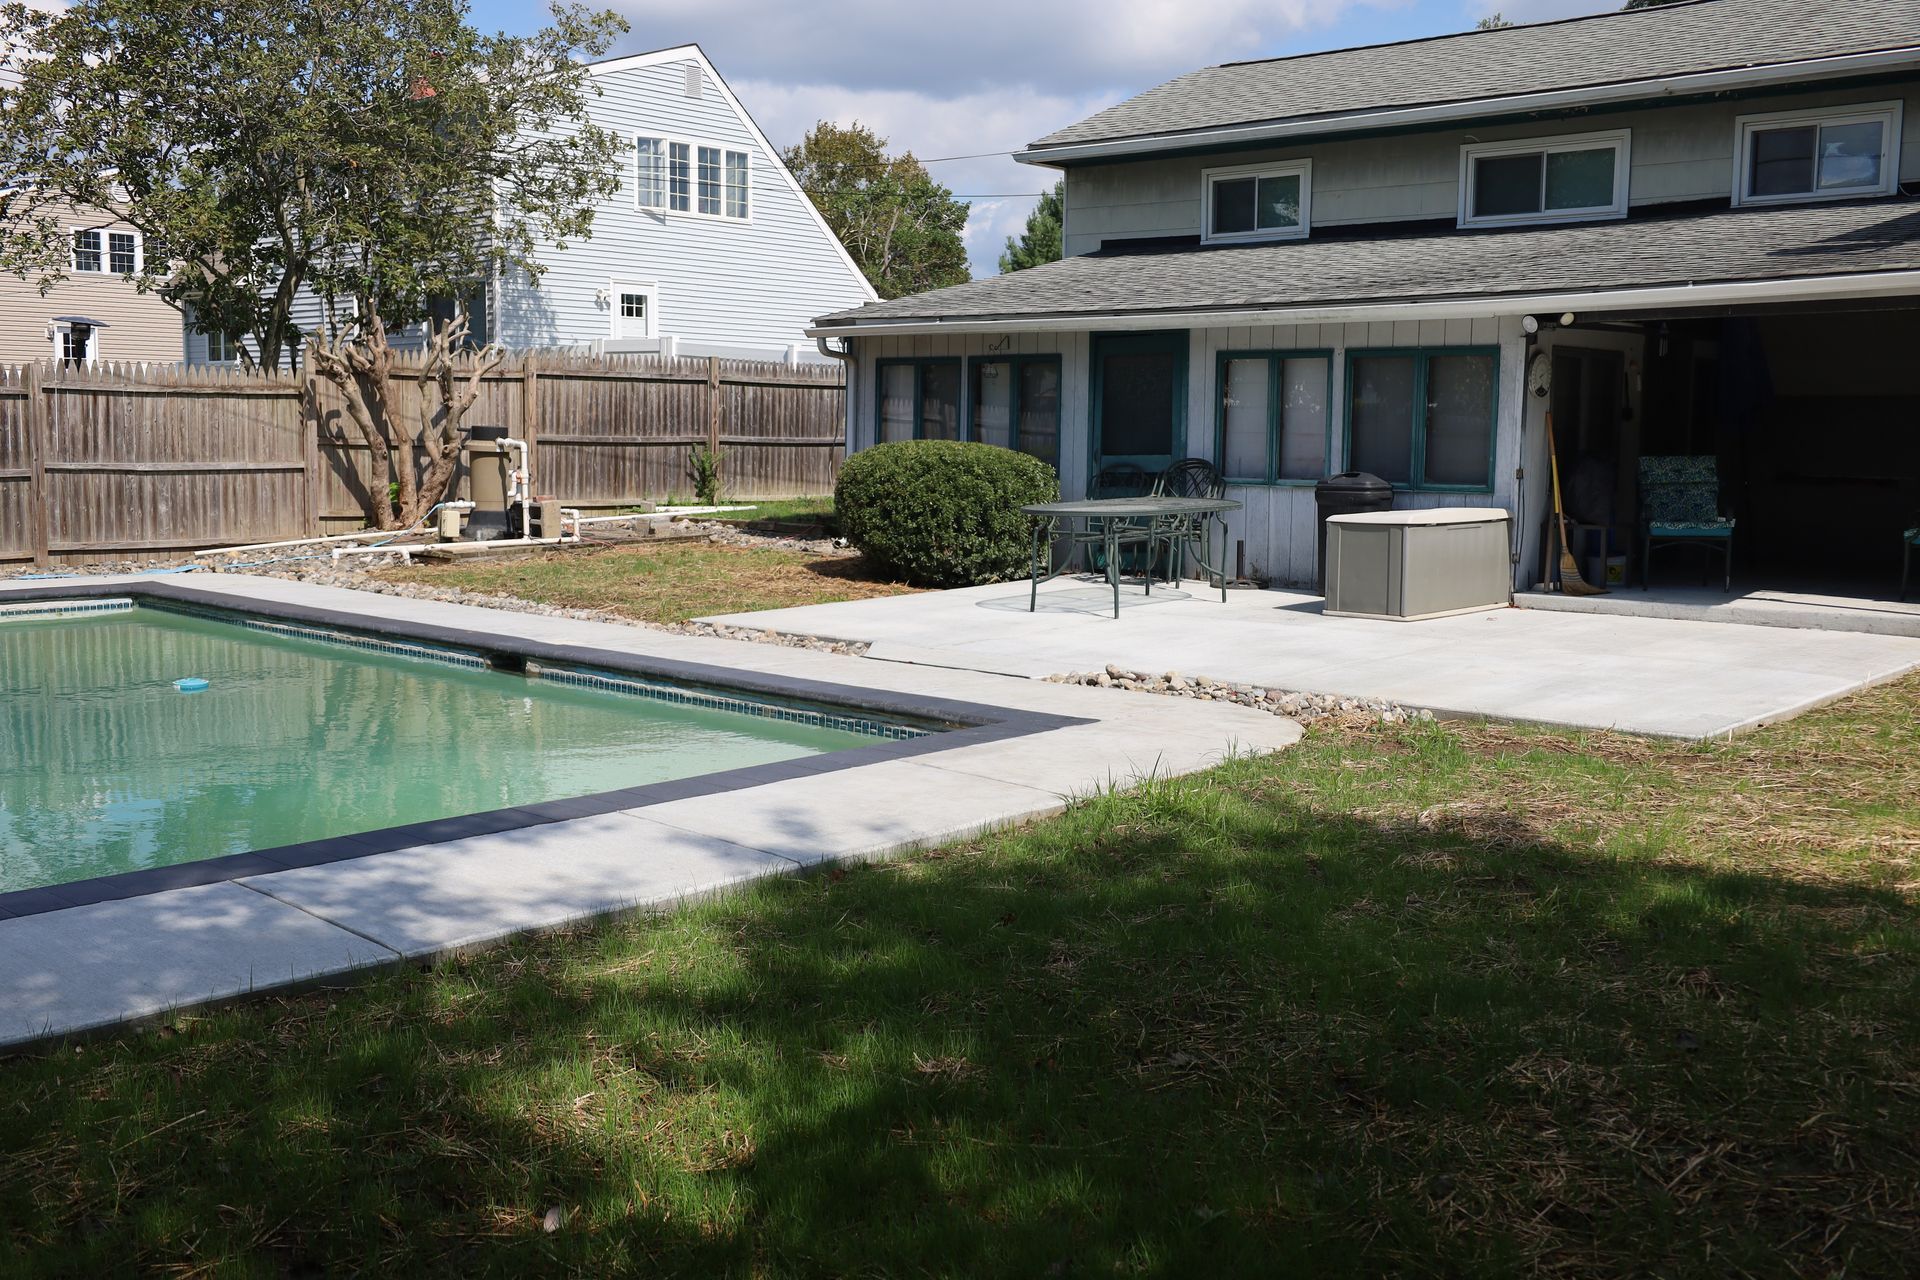 New concrete pool deck and patio in Delaware backyard with fence